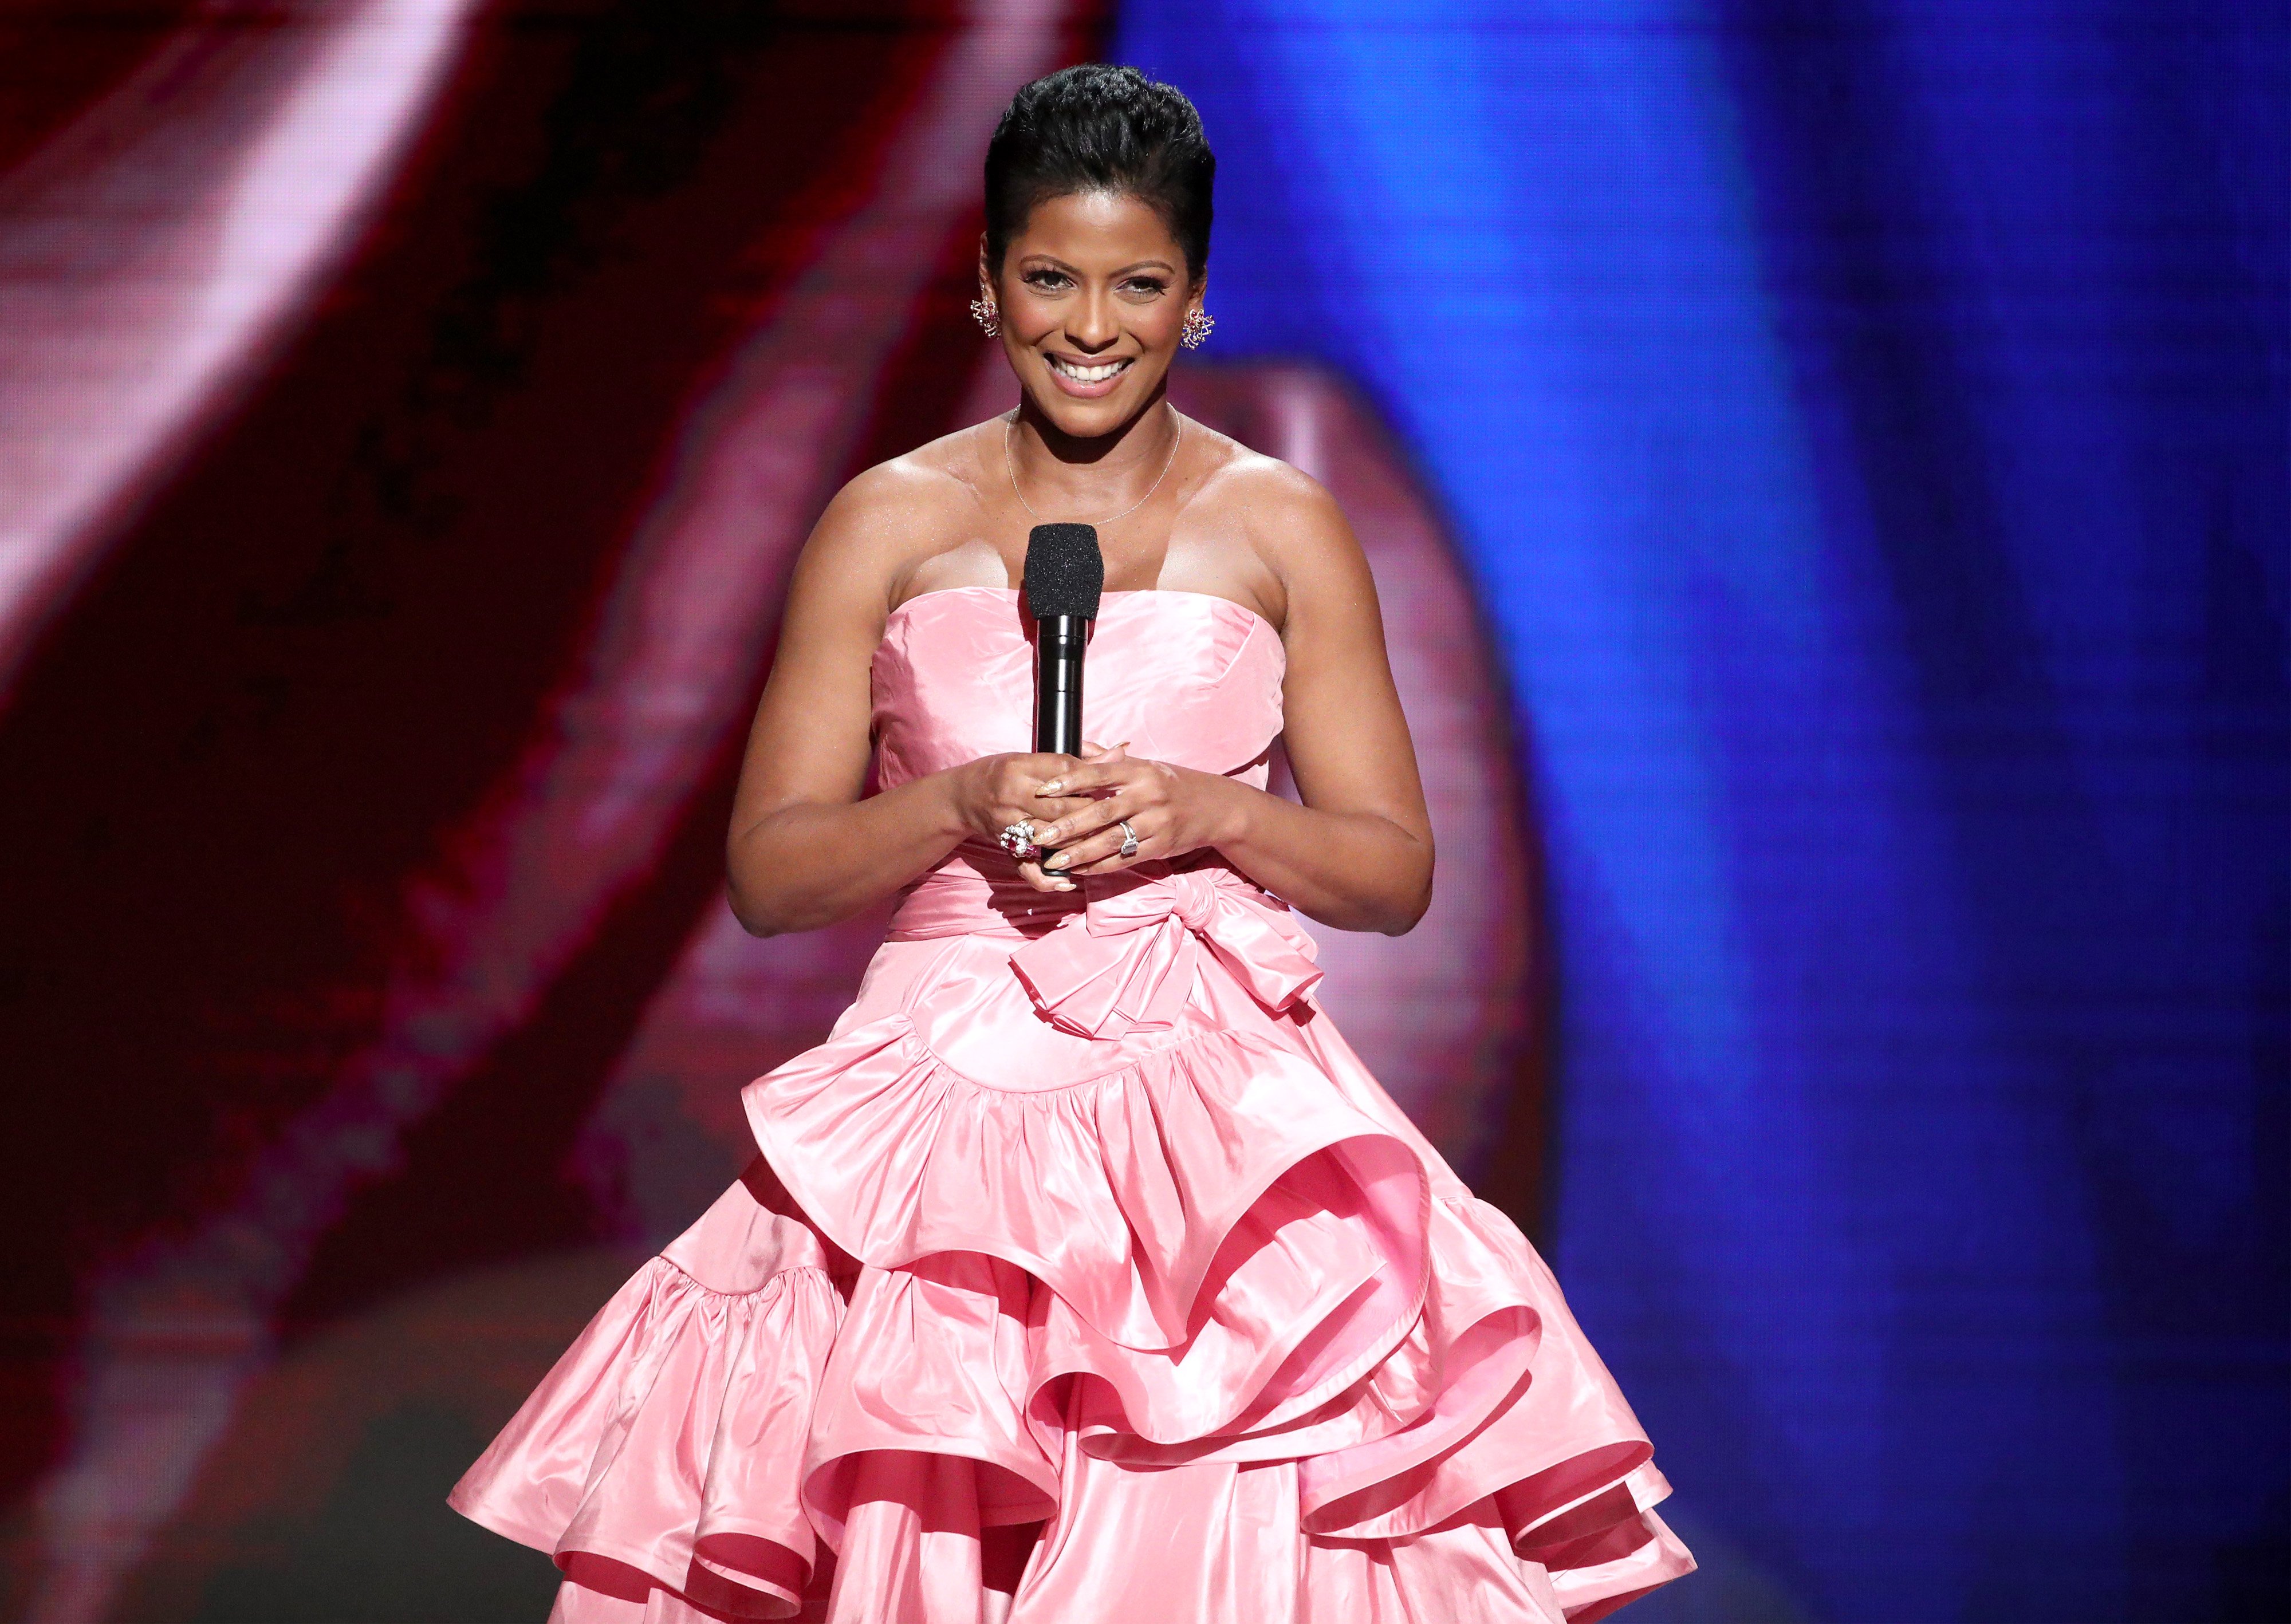 Tamron Hall pictured at the 51st NAACP Image Awards at Pasadena Civic Auditorium on February 22, 2020 in Pasadena, California. | Source: Getty Images